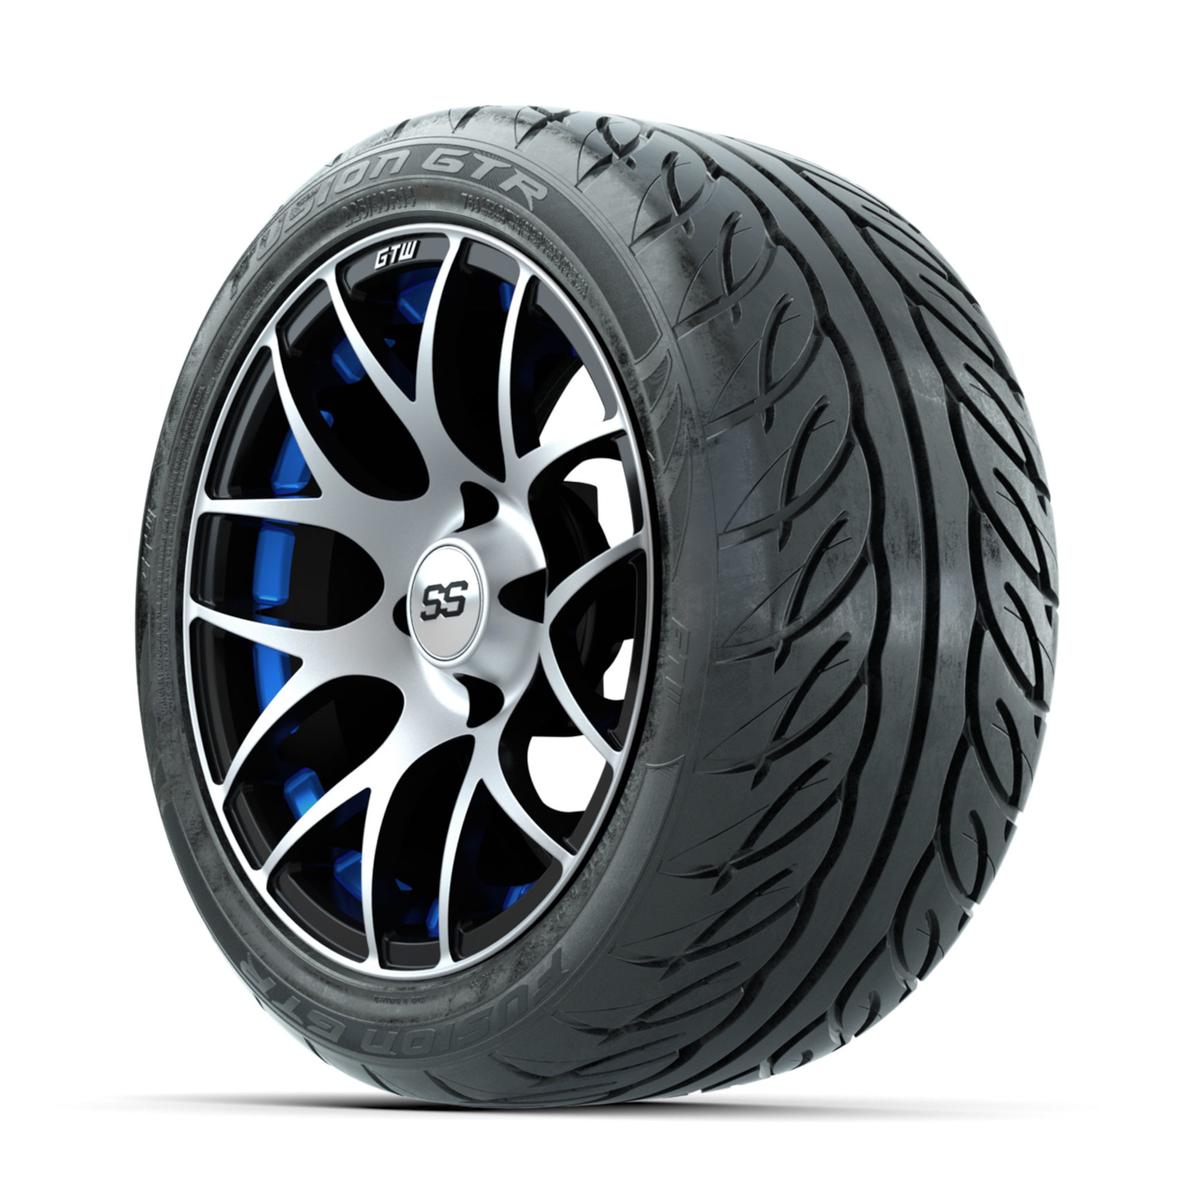 GTW Pursuit Machined/Blue 14 in Wheels with 225/40-R14 Fusion GTR Street Tires – Full Set